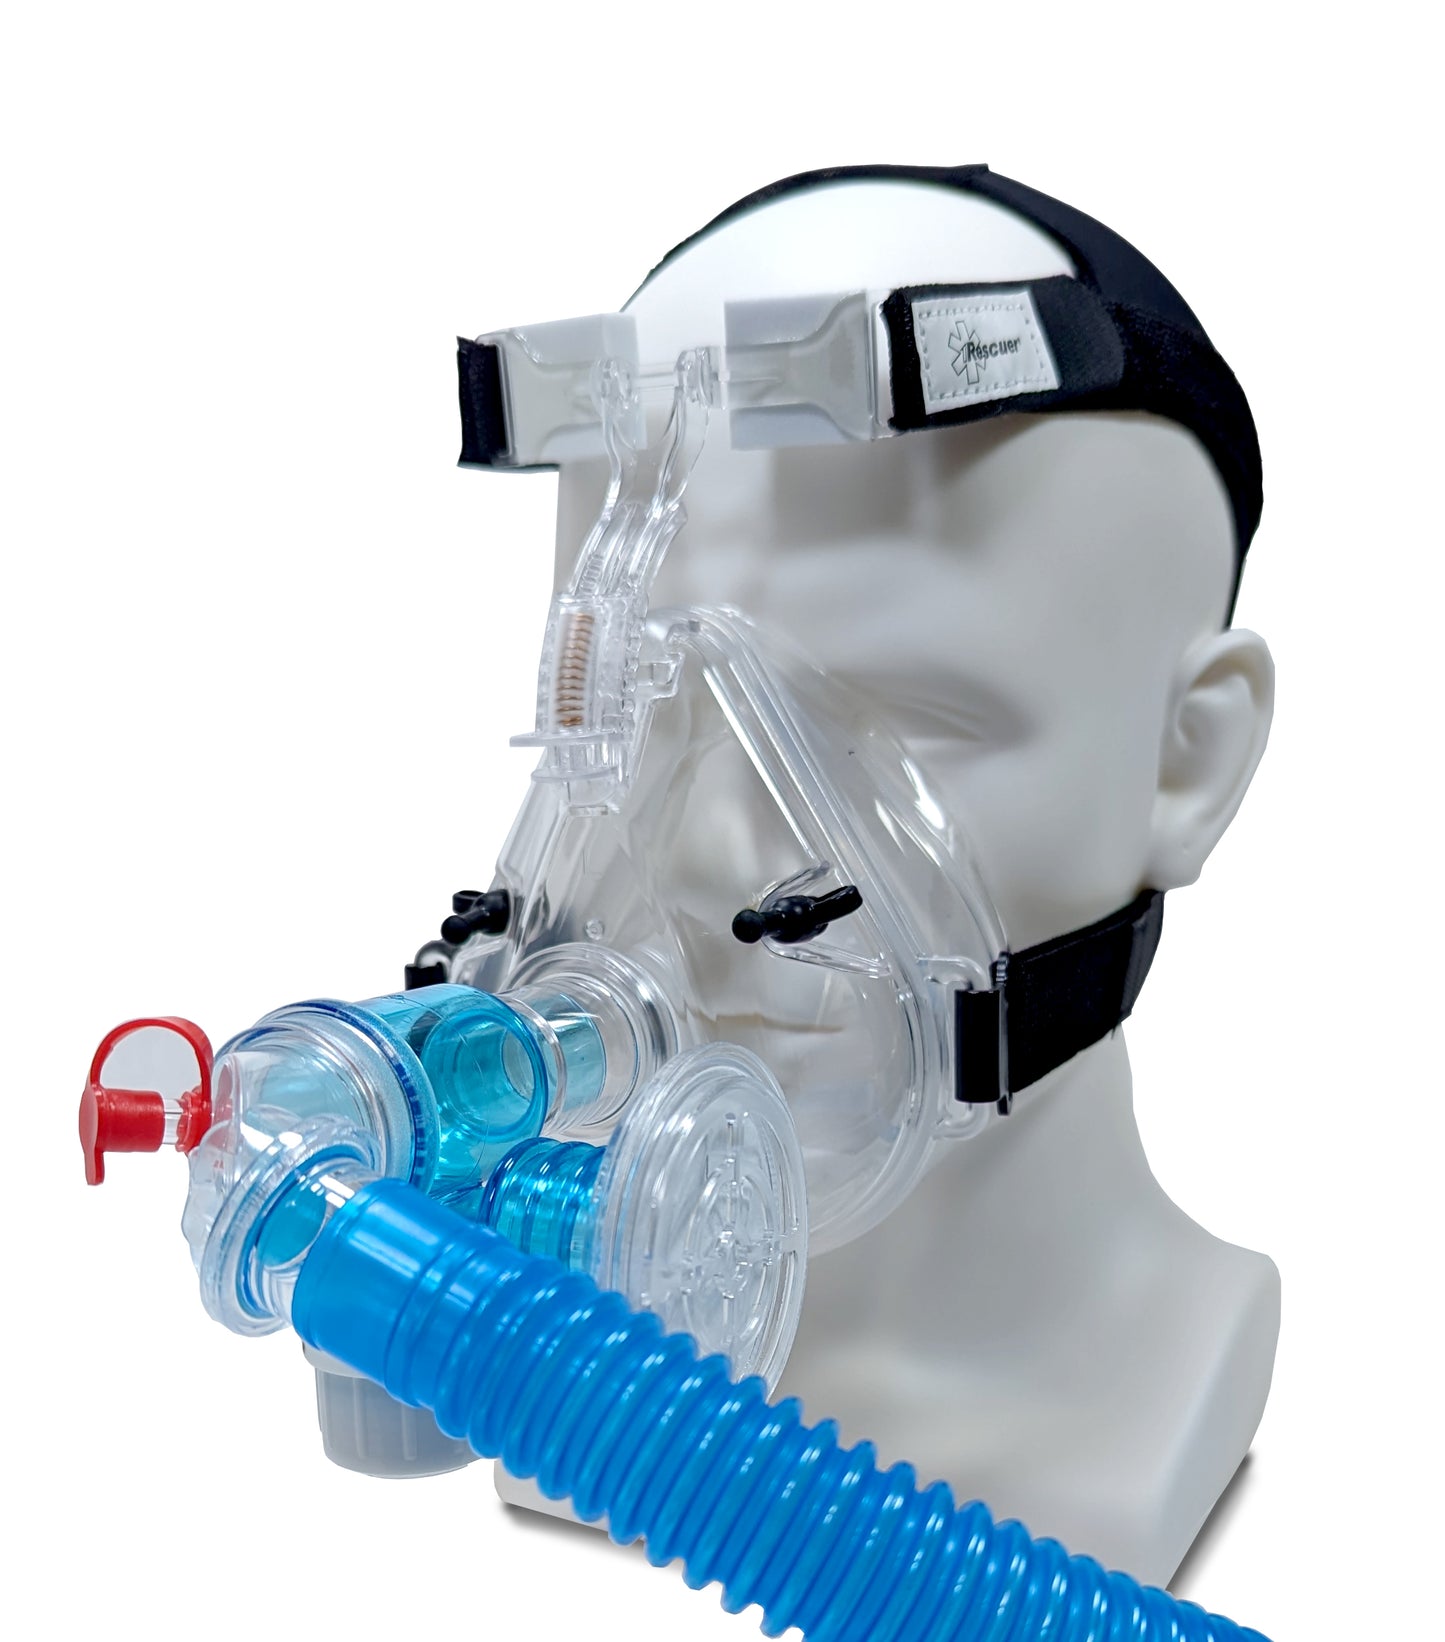 Rescuer® 8700 - Emergency CPAP system with adjustable large CPAP mask